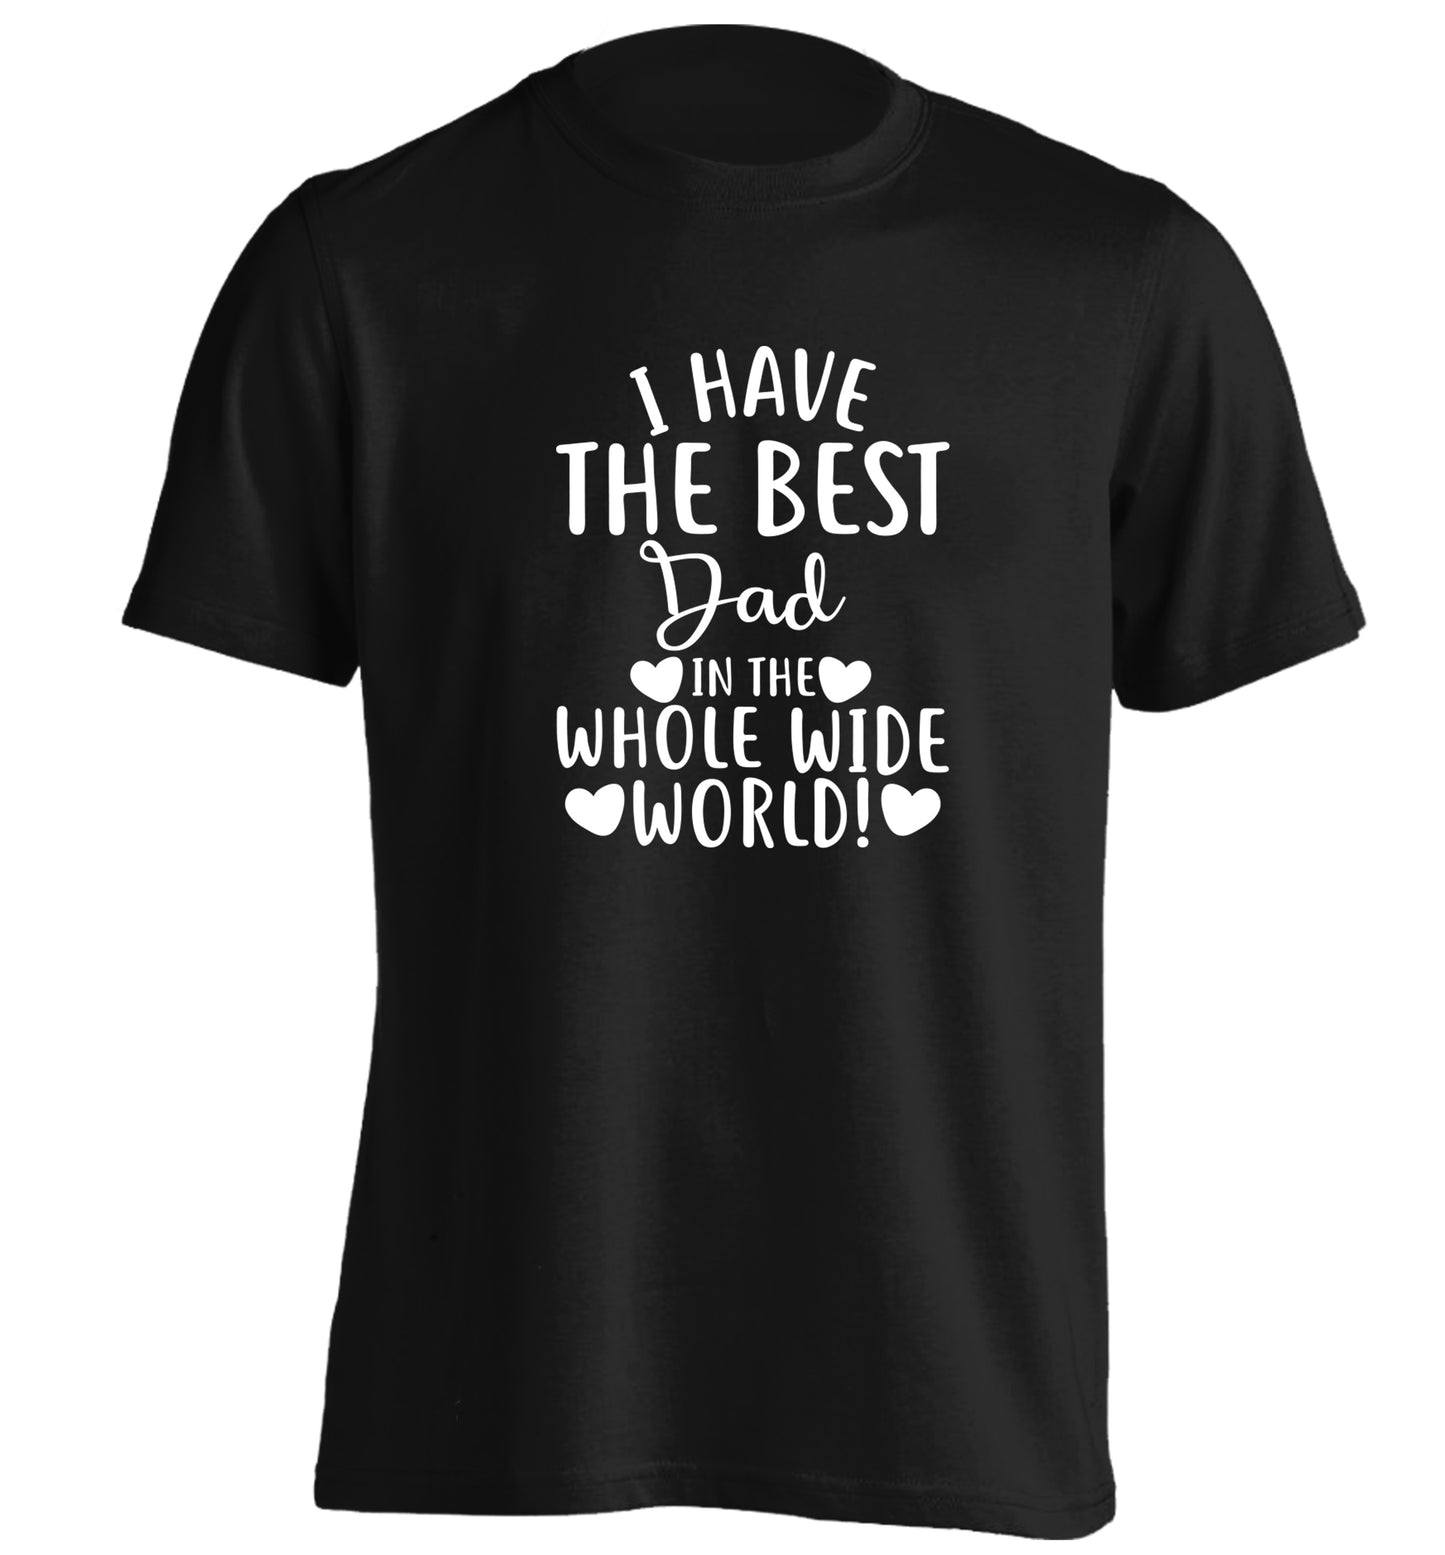 I have the best dad in the whole wide world! adults unisex black Tshirt 2XL